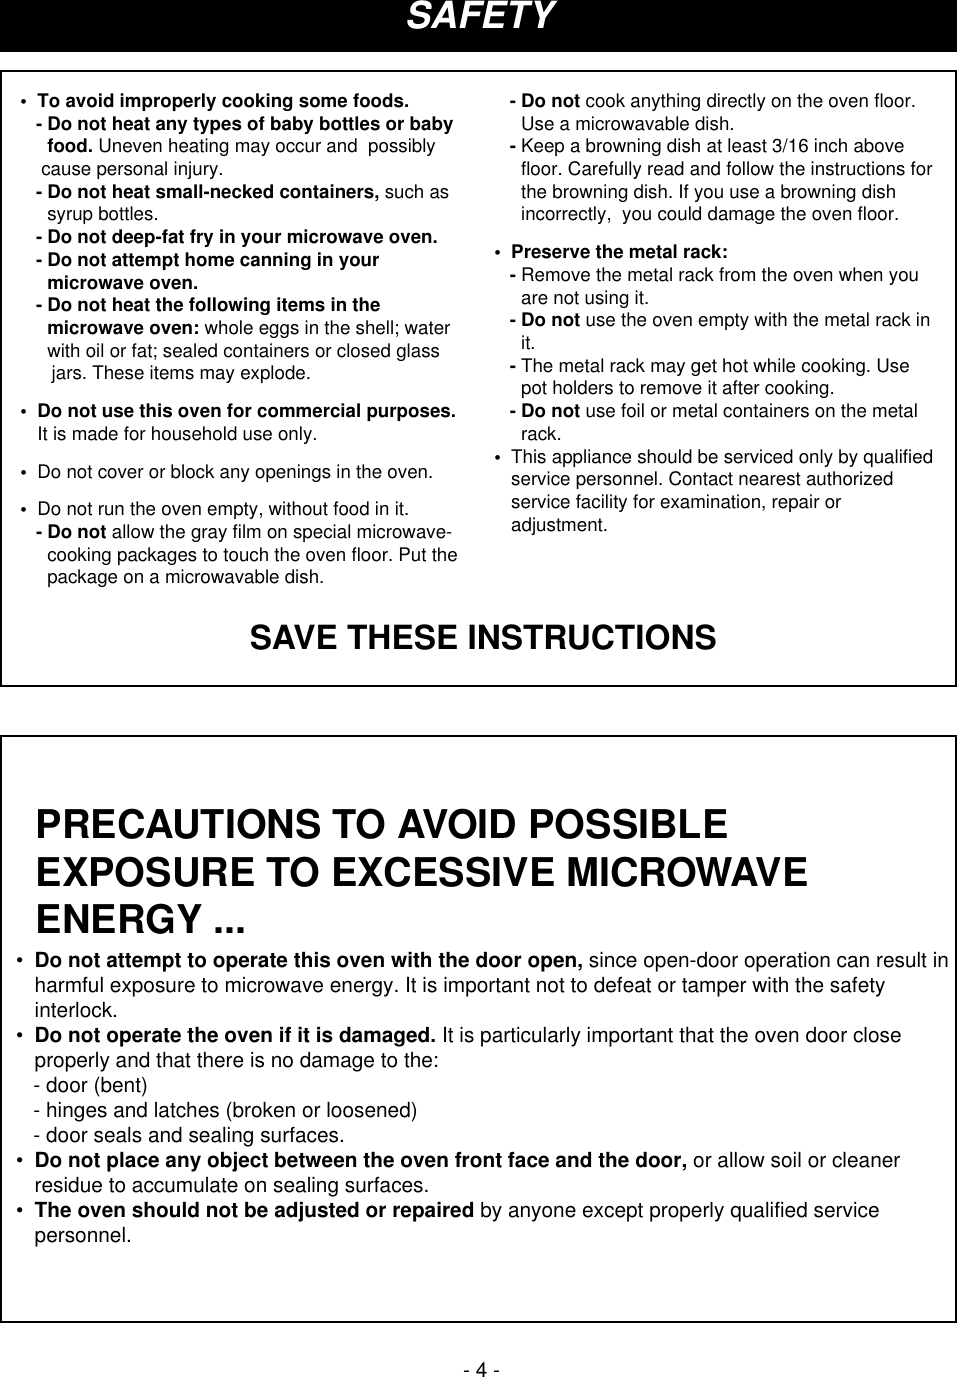 PRECAUTIONS TO AVOID POSSIBLEEXPOSURE TO EXCESSIVE MICROWAVEENERGY ...•  Do not attempt to operate this oven with the door open, since open-door operation can result inharmful exposure to microwave energy. It is important not to defeat or tamper with the safetyinterlock.•  Do not operate the oven if it is damaged. It is particularly important that the oven door closeproperly and that there is no damage to the:- door (bent)- hinges and latches (broken or loosened)- door seals and sealing surfaces.•  Do not place any object between the oven front face and the door, or allow soil or cleanerresidue to accumulate on sealing surfaces.•  The oven should not be adjusted or repaired by anyone except properly qualified servicepersonnel.•  To avoid improperly cooking some foods.- Do not heat any types of baby bottles or babyfood. Uneven heating may occur and  possibly cause personal injury.- Do not heat small-necked containers, such assyrup bottles.- Do not deep-fat fry in your microwave oven.- Do not attempt home canning in yourmicrowave oven.- Do not heat the following items in themicrowave oven: whole eggs in the shell; waterwith oil or fat; sealed containers or closed glass  jars. These items may explode.•  Do not use this oven for commercial purposes.It is made for household use only.•  Do not cover or block any openings in the oven.•  Do not run the oven empty, without food in it.- Do not allow the gray film on special microwave-cooking packages to touch the oven floor. Put thepackage on a microwavable dish.- Do not cook anything directly on the oven floor.Use a microwavable dish.- Keep a browning dish at least 3/16 inch abovefloor. Carefully read and follow the instructions forthe browning dish. If you use a browning dishincorrectly,  you could damage the oven floor.•  Preserve the metal rack:- Remove the metal rack from the oven when youare not using it.- Do not use the oven empty with the metal rack init.- The metal rack may get hot while cooking. Usepot holders to remove it after cooking.- Do not use foil or metal containers on the metalrack.•  This appliance should be serviced only by qualifiedservice personnel. Contact nearest authorizedservice facility for examination, repair oradjustment.SAVE THESE INSTRUCTIONS- 4 -SAFETY